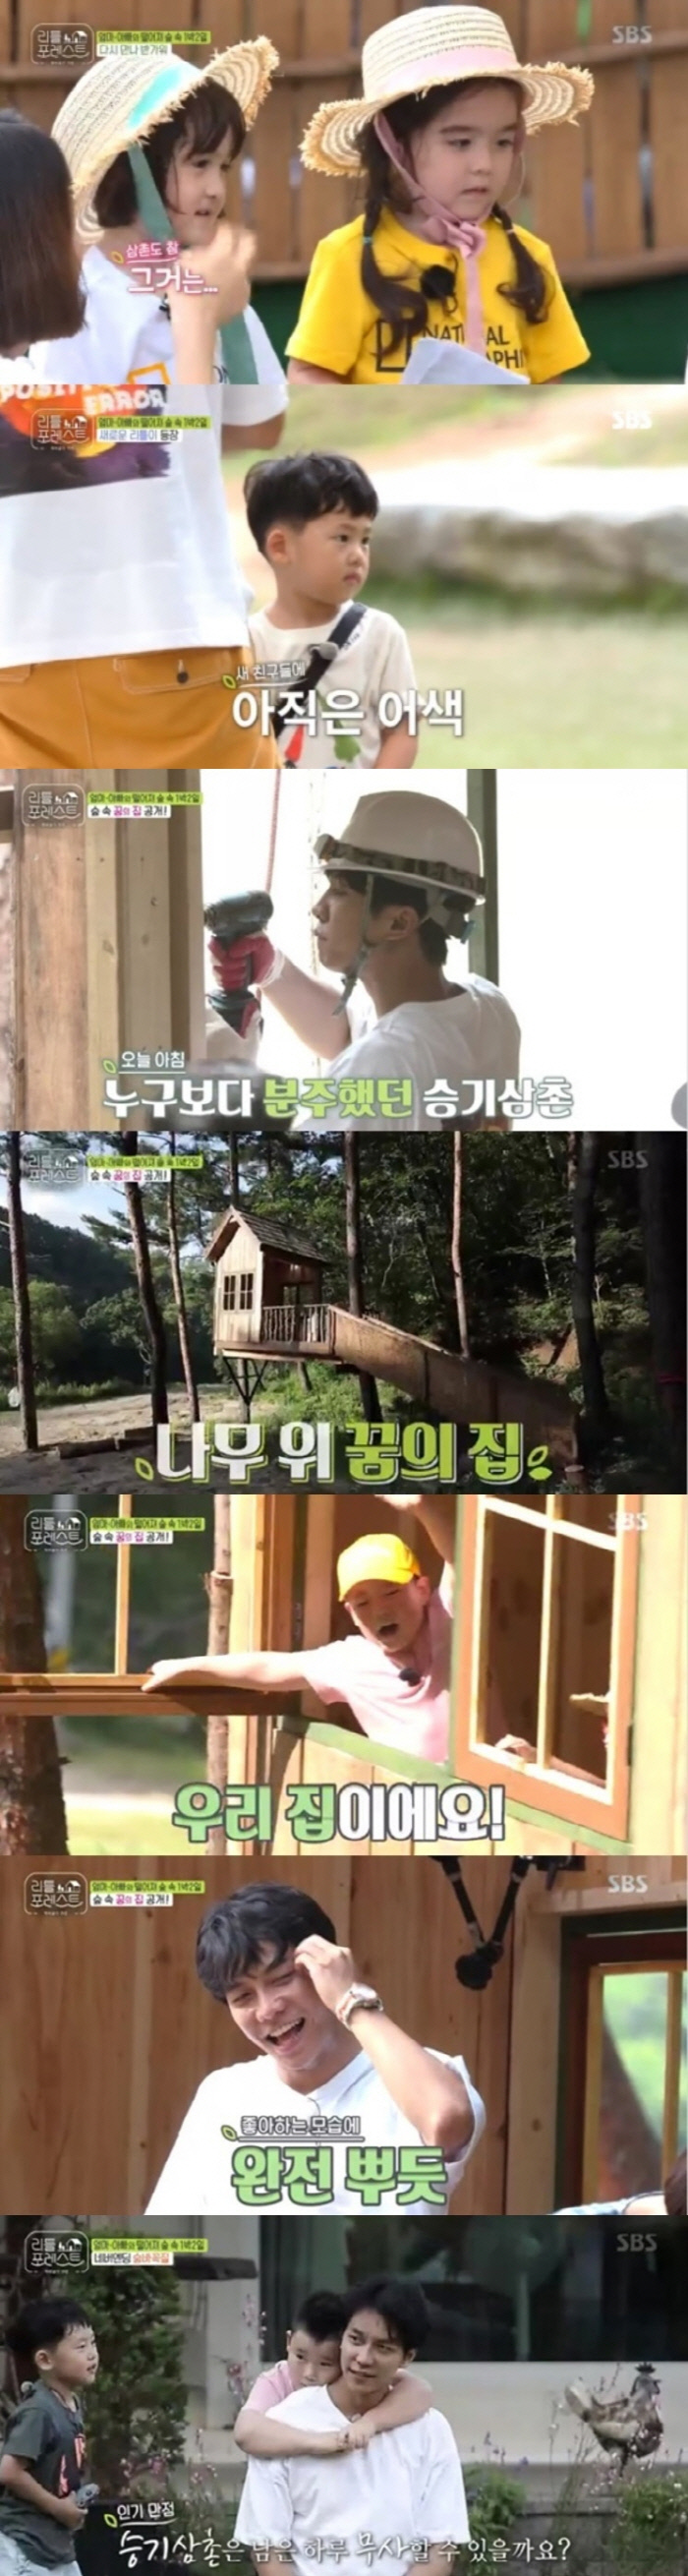 Lee Seung-gi has unveiled Treehouse for children.In the 5th episode of the SBS Monday entertainment program Little Forest, which was broadcast on the 26th, the new Little Lee joined and brought new fun.The members and the Littles, who had a second meeting on the day, welcomed each other with a more relaxed look.Lee Han, who was ashamed of not being able to approach Brooke easily in the last broadcast, laughed again this time, and Brooke and Grace gave the members a picture gift and added warmth.Lee Seo-jin, a brux-barrassing, laughed at Brookes surprise gift, and Jung So-min was happy that he was heart-throbbing.It was Lee Seung-gis Treehouse opening that attracted Eye-catching on the day.As soon as they came to the shoot, the children found blueberries, but Lee Seung-gi was desperate for the news that blueberries had all fallen to the ground due to rain.But Lee Seung-gi spread whispers to the children, I have built a treehouse to turn their attention.The effect was perfect: Littles smiled broadly at the newly built treehouse, and Lee Seung-gi, who had been involved in the production himself, showed pride.With Lees suggestion, Little began to decorate their homes with the re-Rys found in nature, and the more beautiful treehouse was completed.At the end of the broadcast, Hide and Seek with Littles were drawn and attracted Eye-catching.As everywhere in the shoot becomes a Hide and Seek place, Little Lees shouted as they played in nature.The new Little showed a fight reminiscent of the Energizer, creating Lee Han and a pleasant chemistry, but Lee Seung-gi was exhausted and Lee Seo-jin worried that Lee Seung-gi would go down.Little people who showed interest in Hide and Seek also increased one by two, and Lee Seung-gi was interested in broadcasting on the 27th because it was predicted that he would fall into Hide and Seek Hell.The 6th episode of Little Forest will be broadcast at 10 p.m. on the 27th.